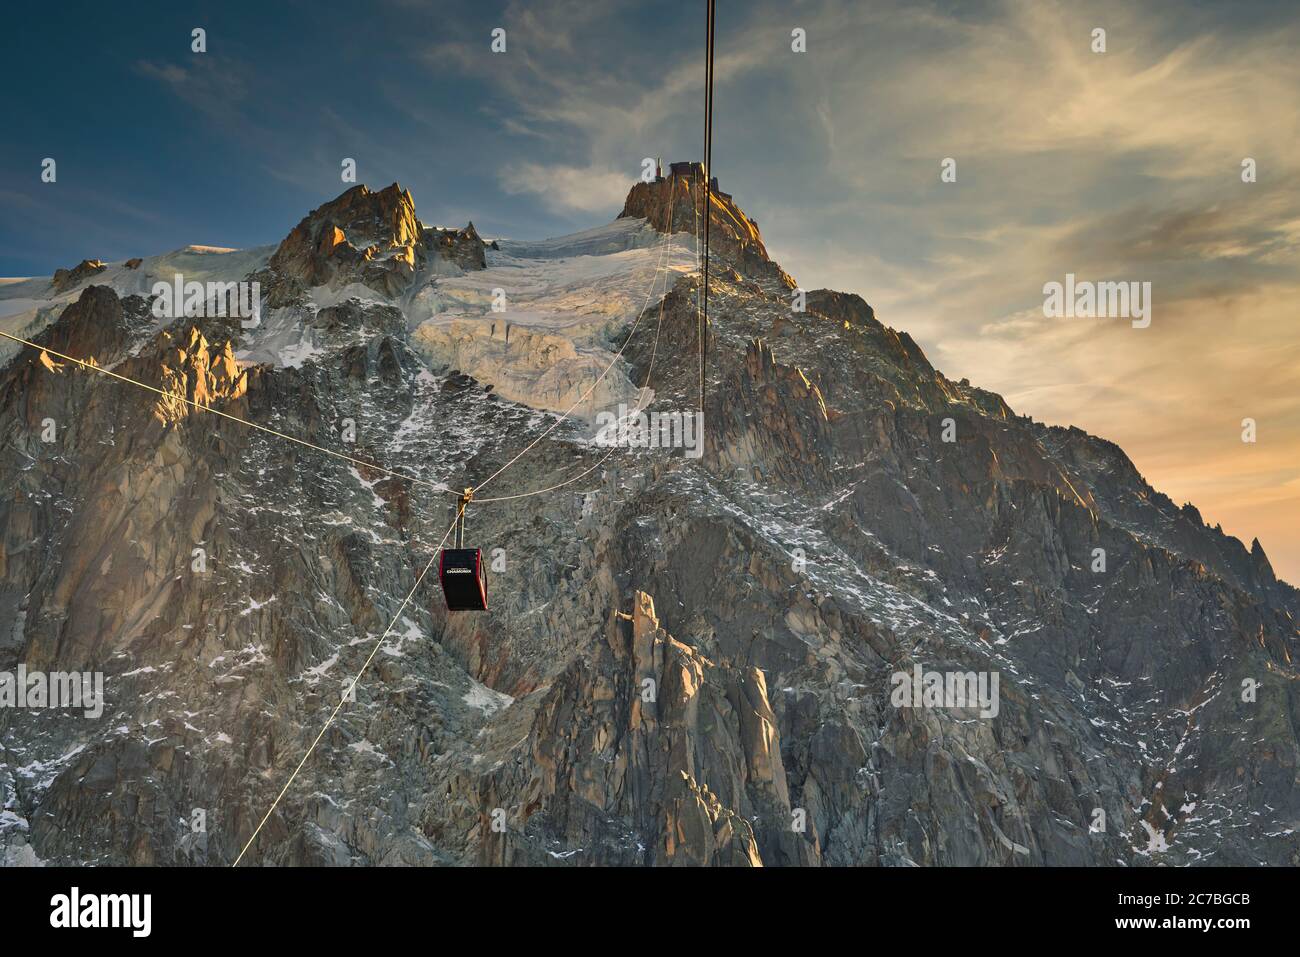 Aiguille du Midi, high mountain in the Mont Blanc Massif of the French Alps. Cable Car from Chamonix to the summit of Aiguille du Midi. Stock Photo